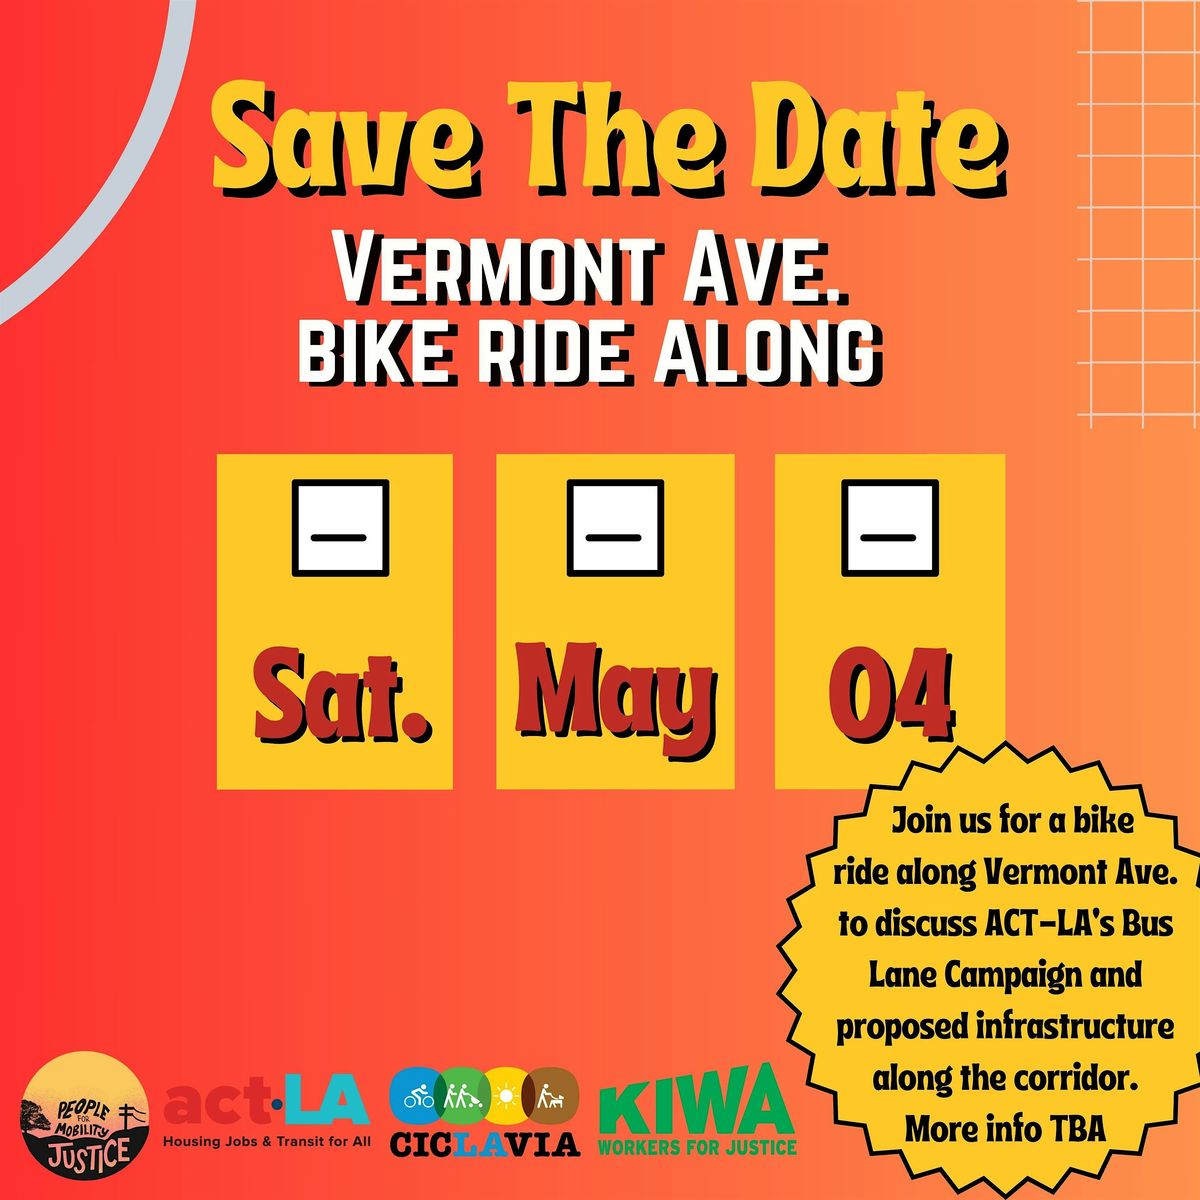 Vermont Avenue Bike Ride Along! Sat, May 4th